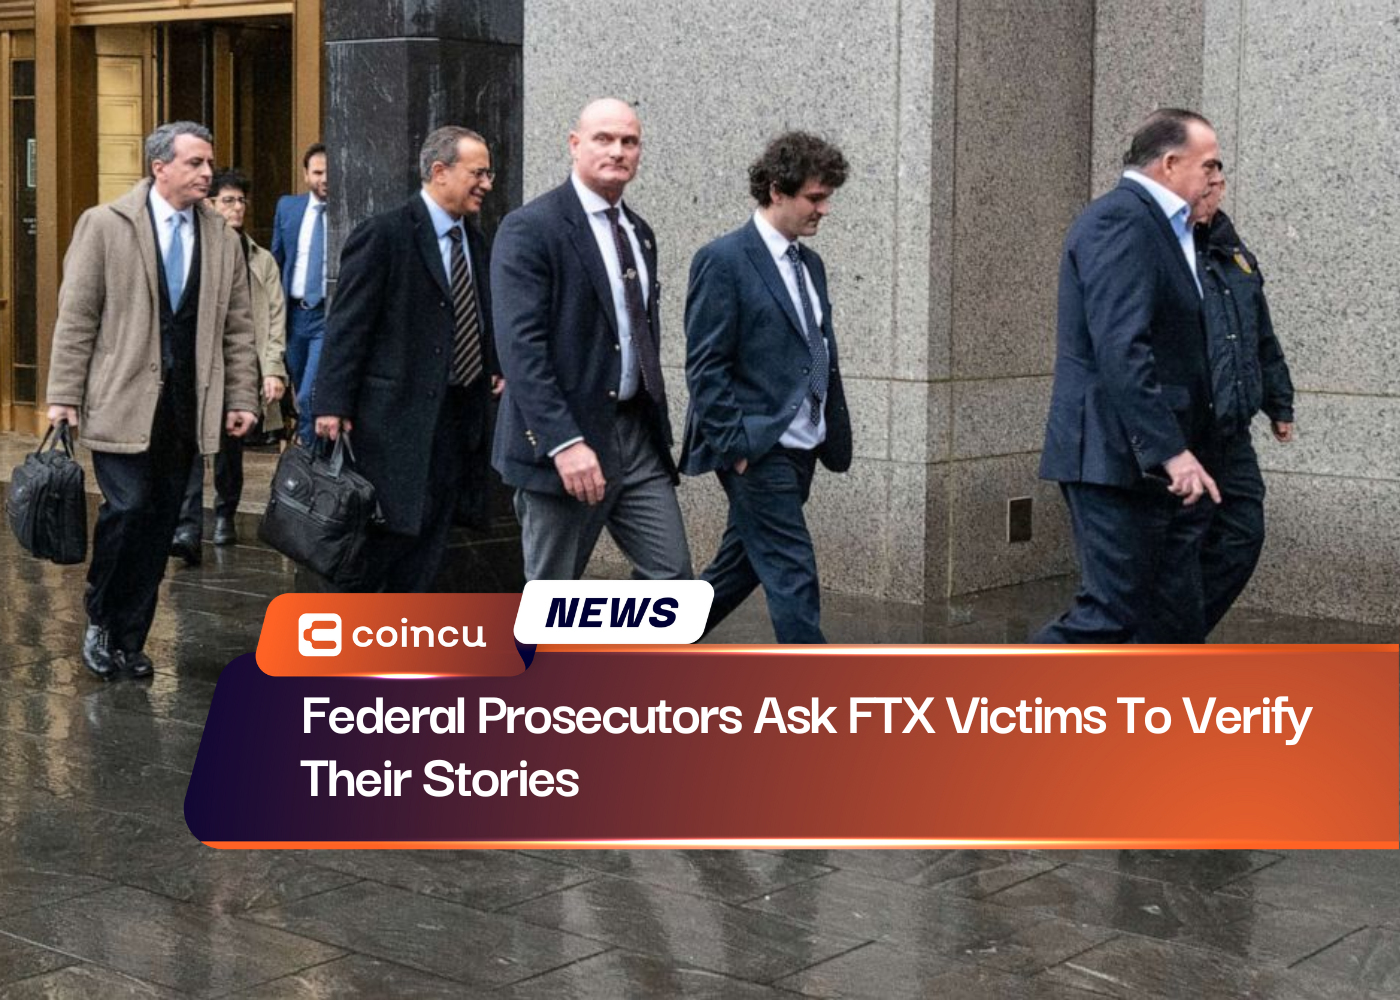 Federal Prosecutors Ask FTX Victims To Verify Their Stories